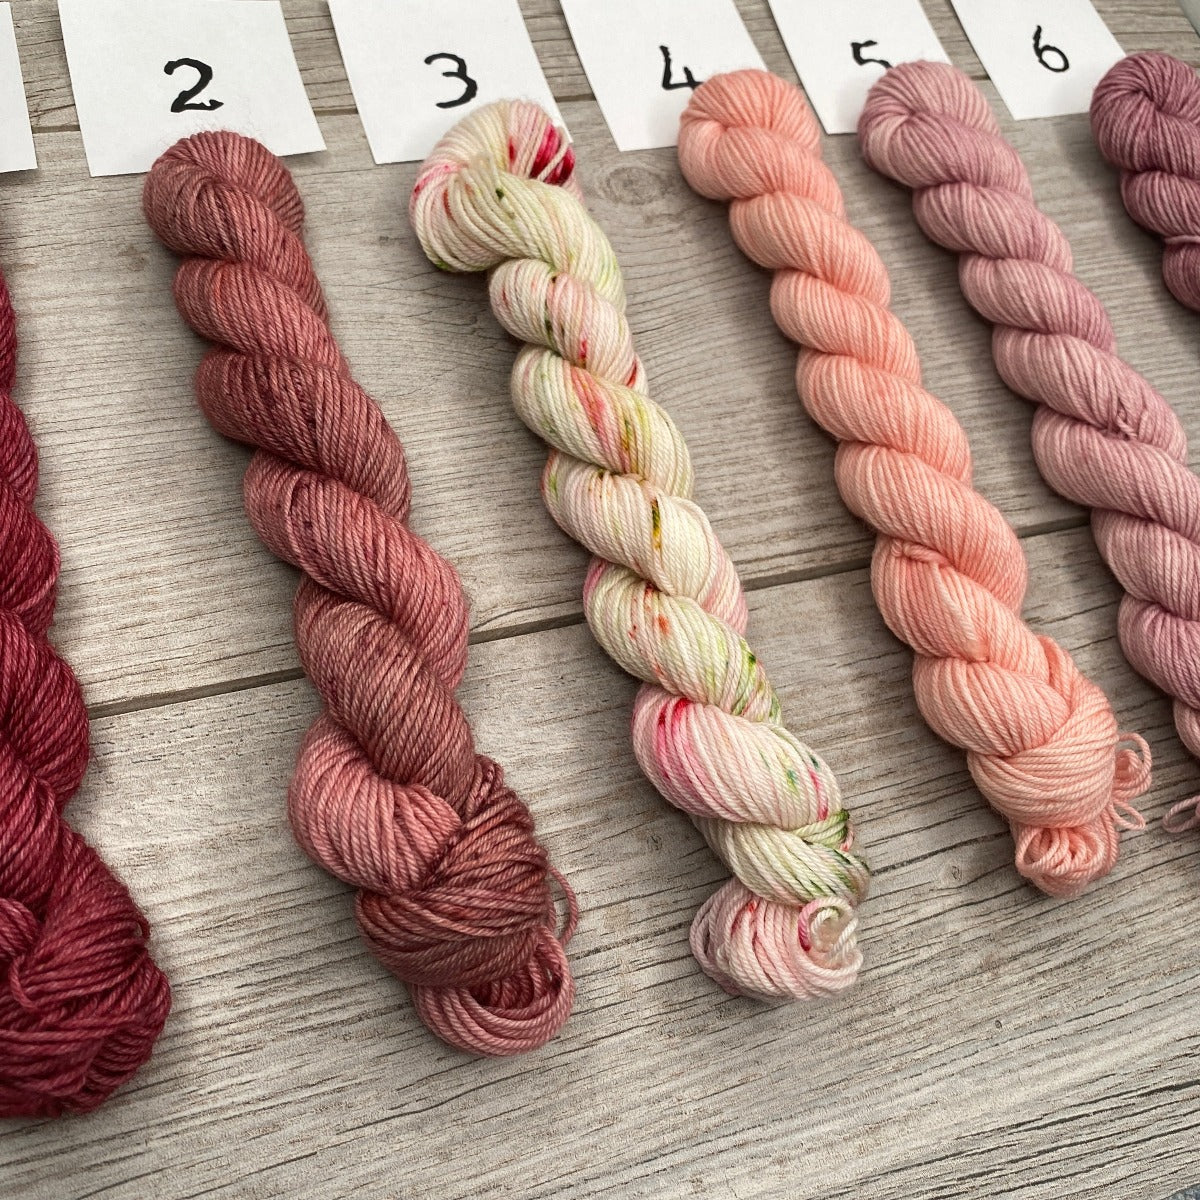 Mini Singles  |  Red and Pink Choices  |  SHEEPISHsock  |  fingering weight